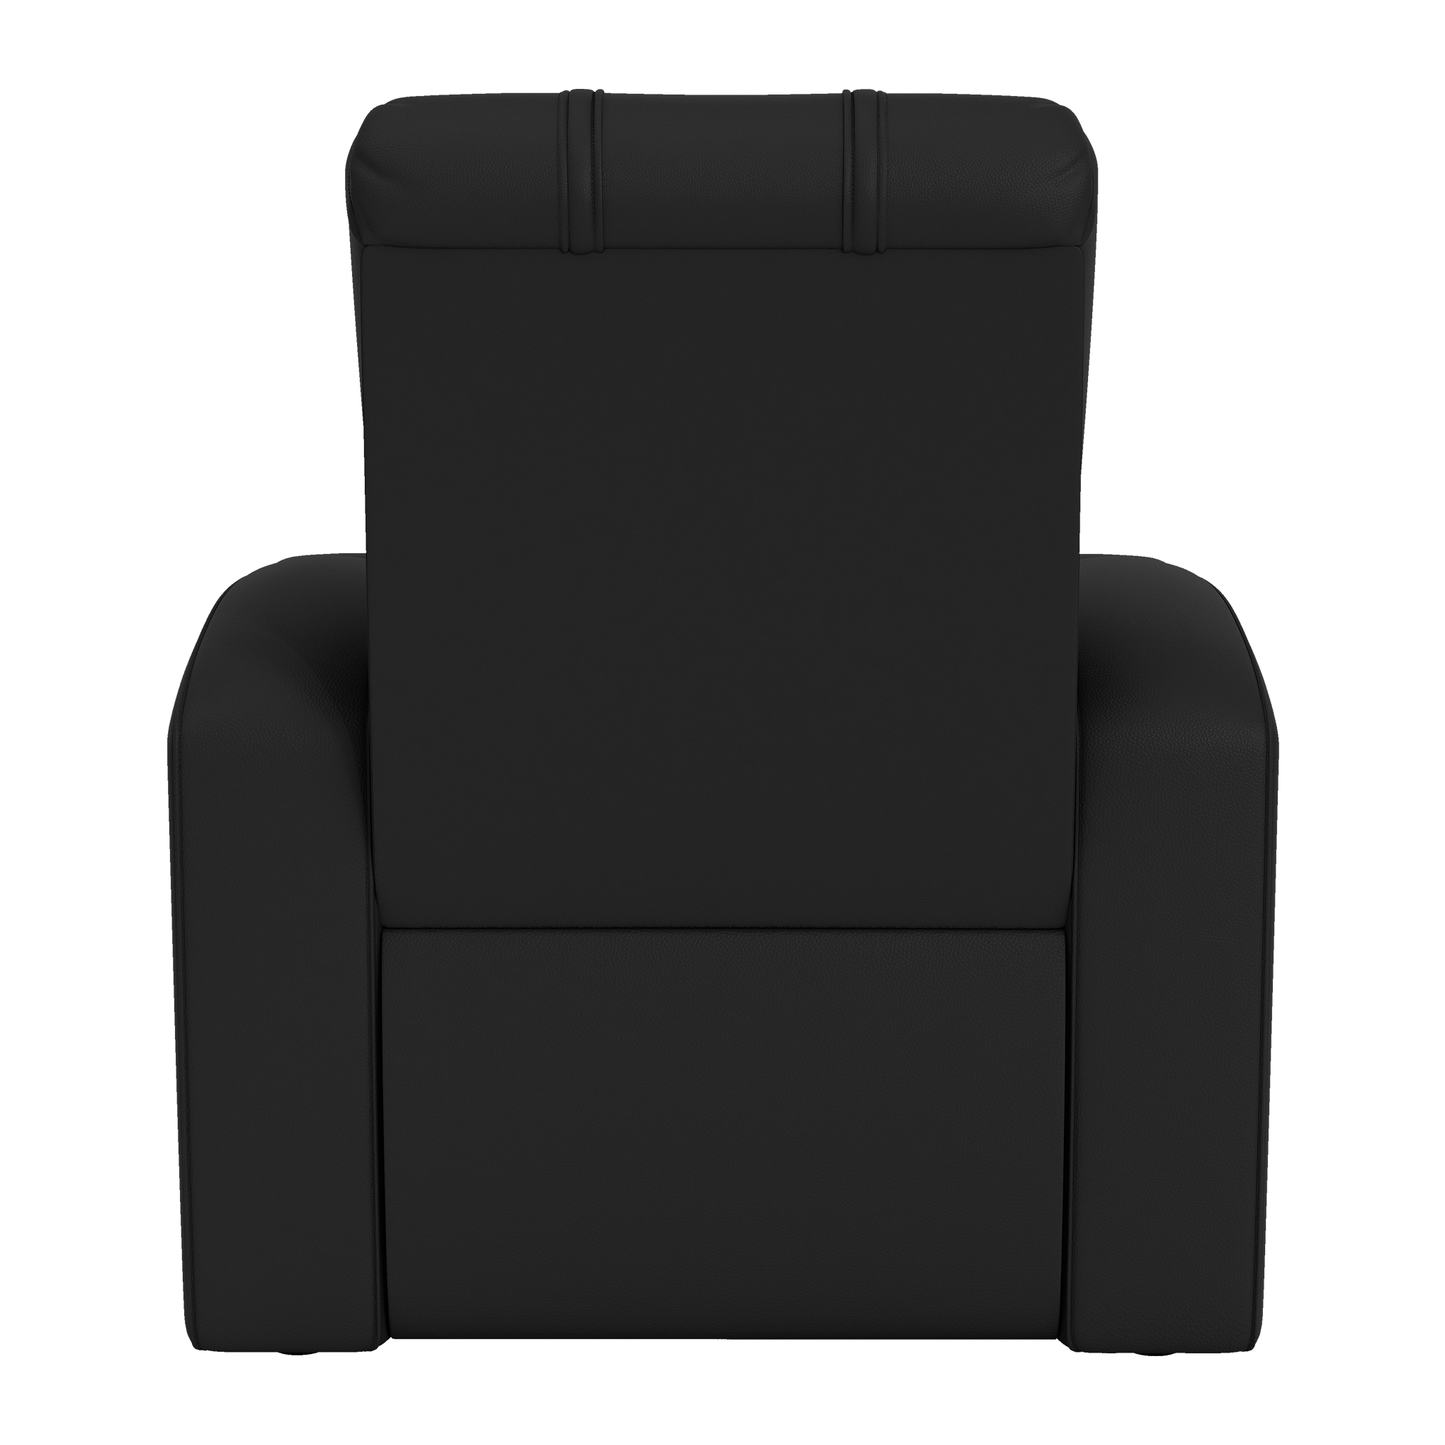 Relax Home Theater Recliner with Deer Head-Whitetail Logo